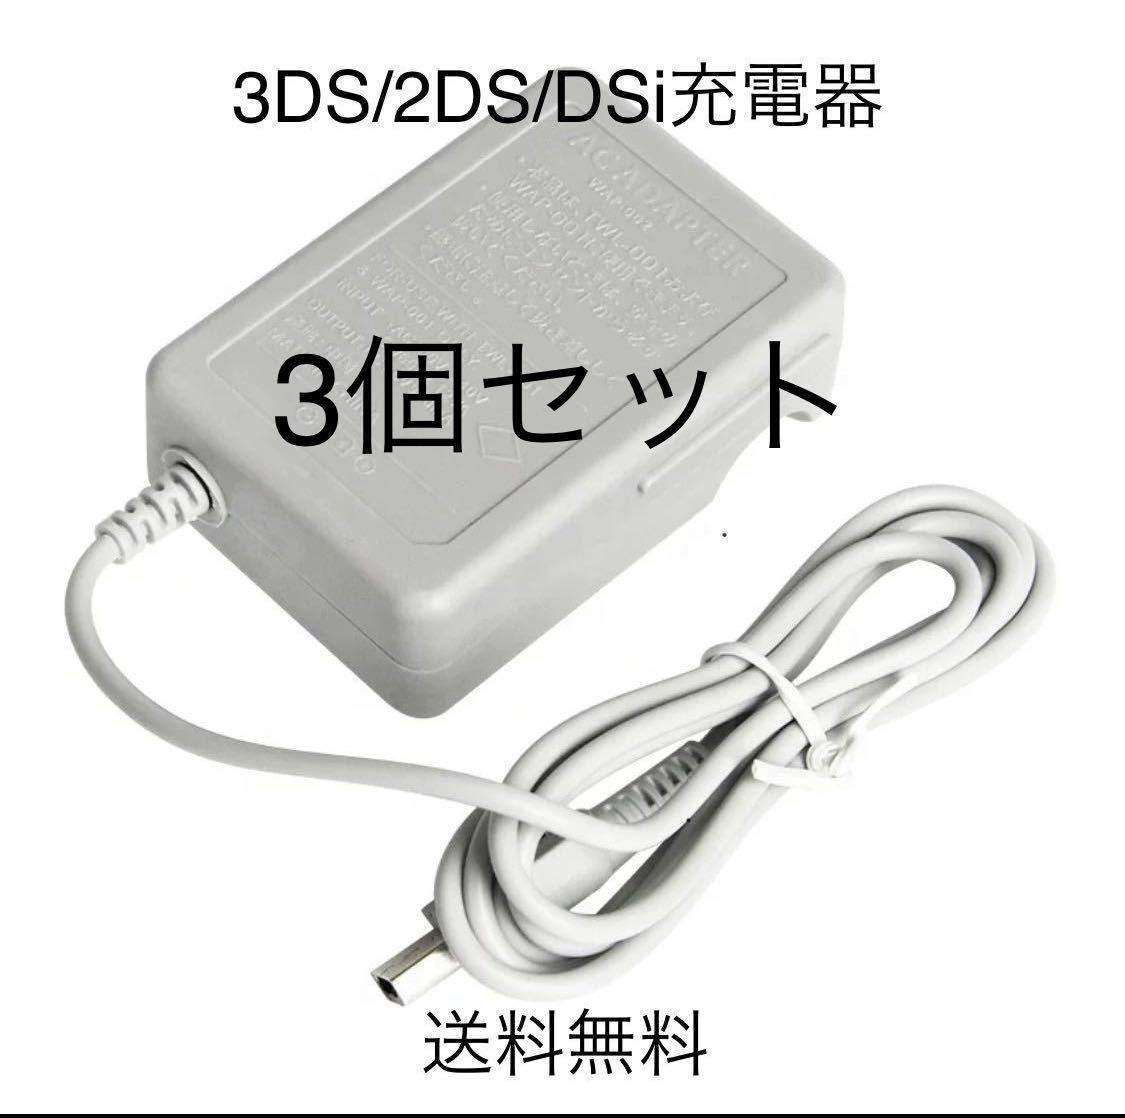 3ds 2ds 3dsll充電器sp